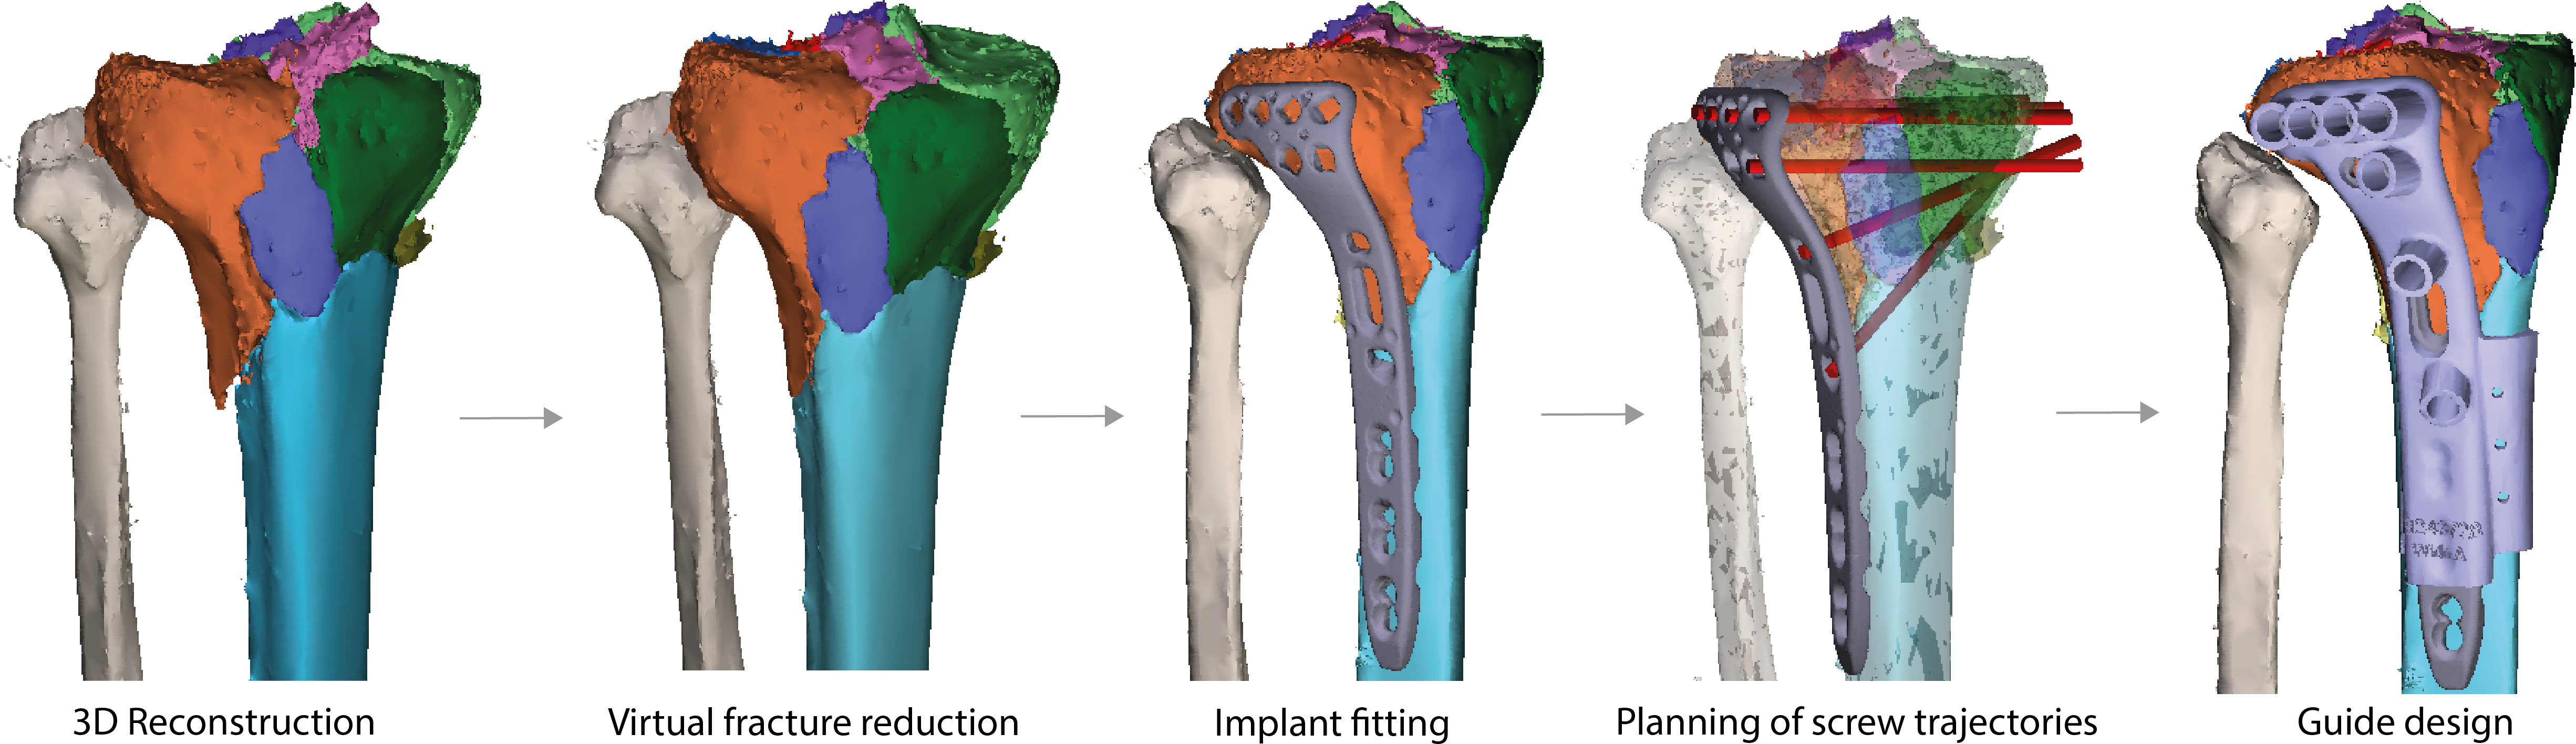 Fig. 1 
            Process of 3D surgical planning including patient-specific drilling guide design. First, a 3D reconstruction is created from the initial CT scan in which all fragments are identified and assigned a different colour. Then, virtual fracture reduction is performed, after which a plate is digitally fitted and screw trajectories (red bars) are predetermined. Finally, the drilling guide is designed to envelop the variable angle-locking compression plate (VA-LCP) to guide the drill bit and screw in the planned trajectories. To position the plate at the intended location, bone-supporting extensions were added to the design of the guide. The guide is subsequently 3D-printed and used during the operation to convert the virtual plan to the patient.
          